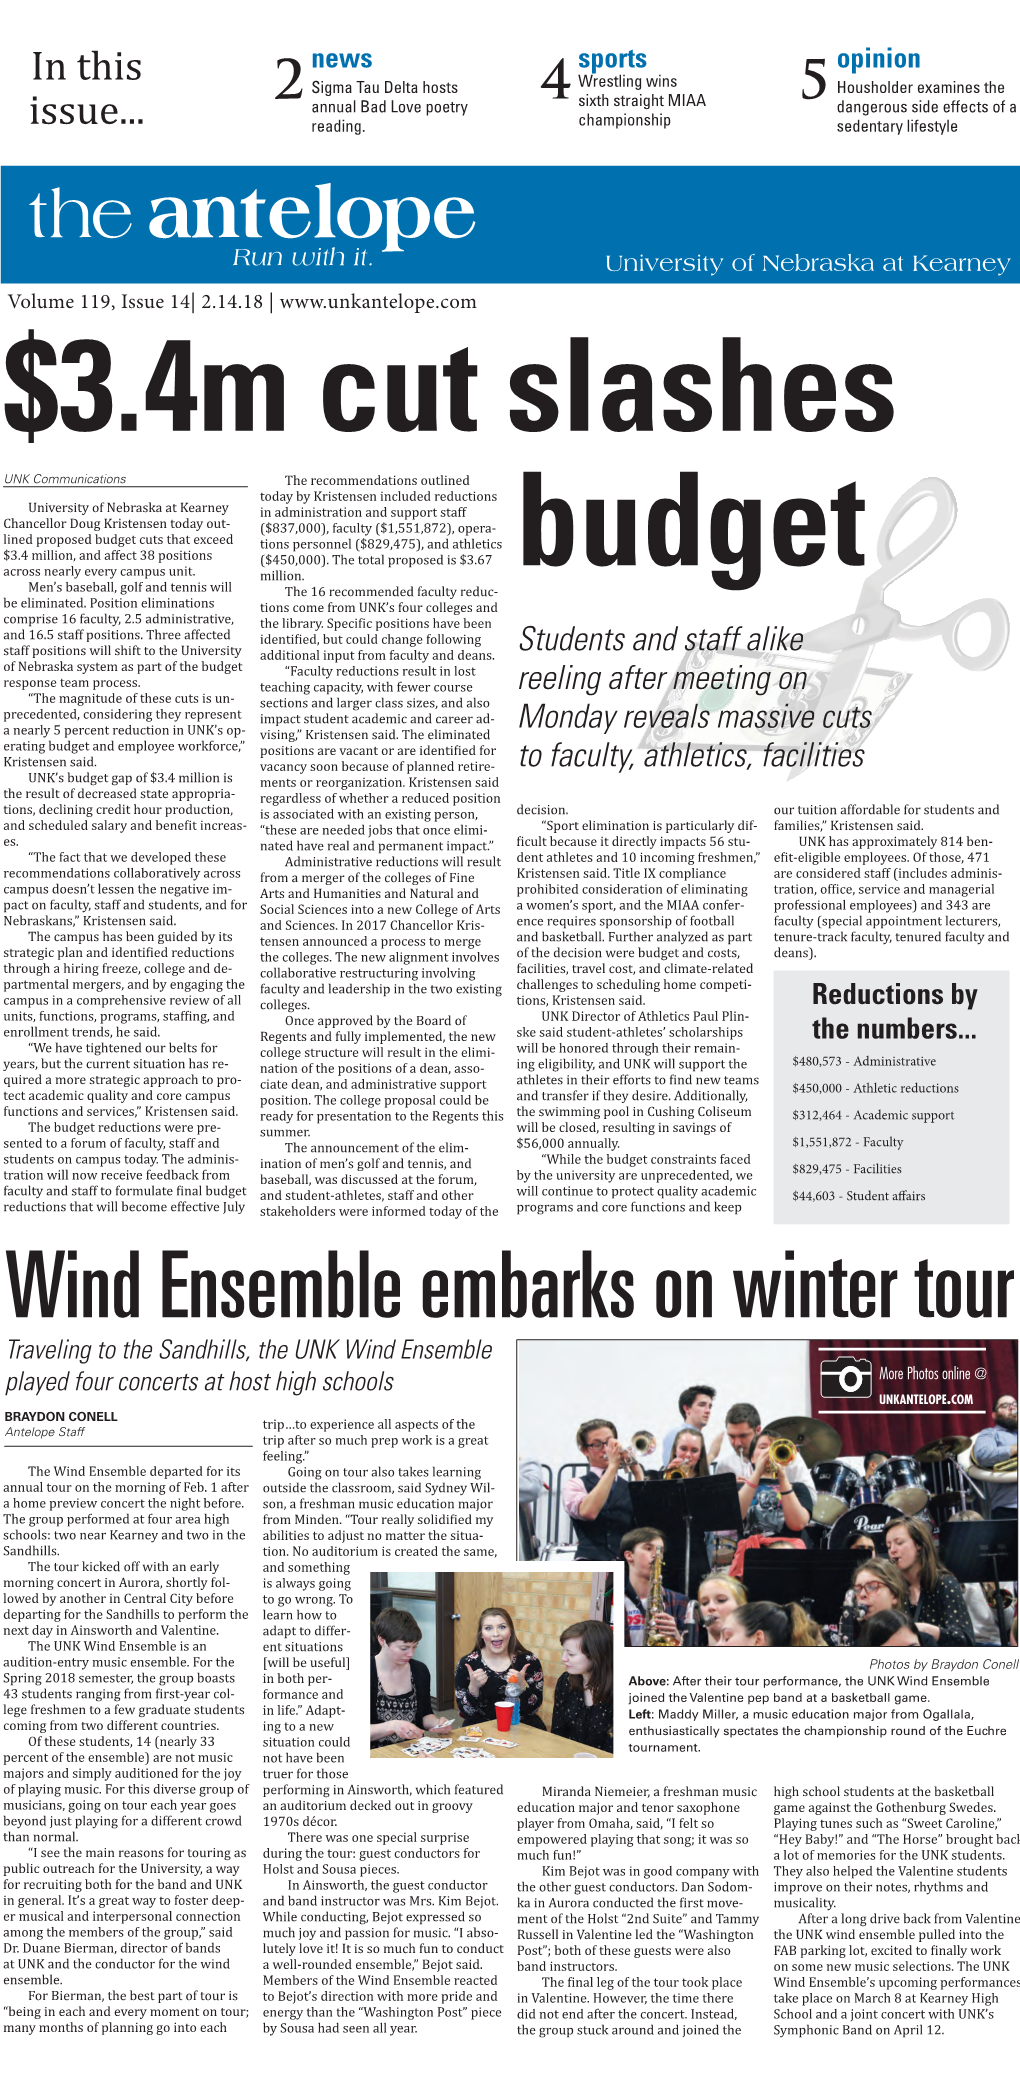 Wind Ensemble Embarks on Winter Tour